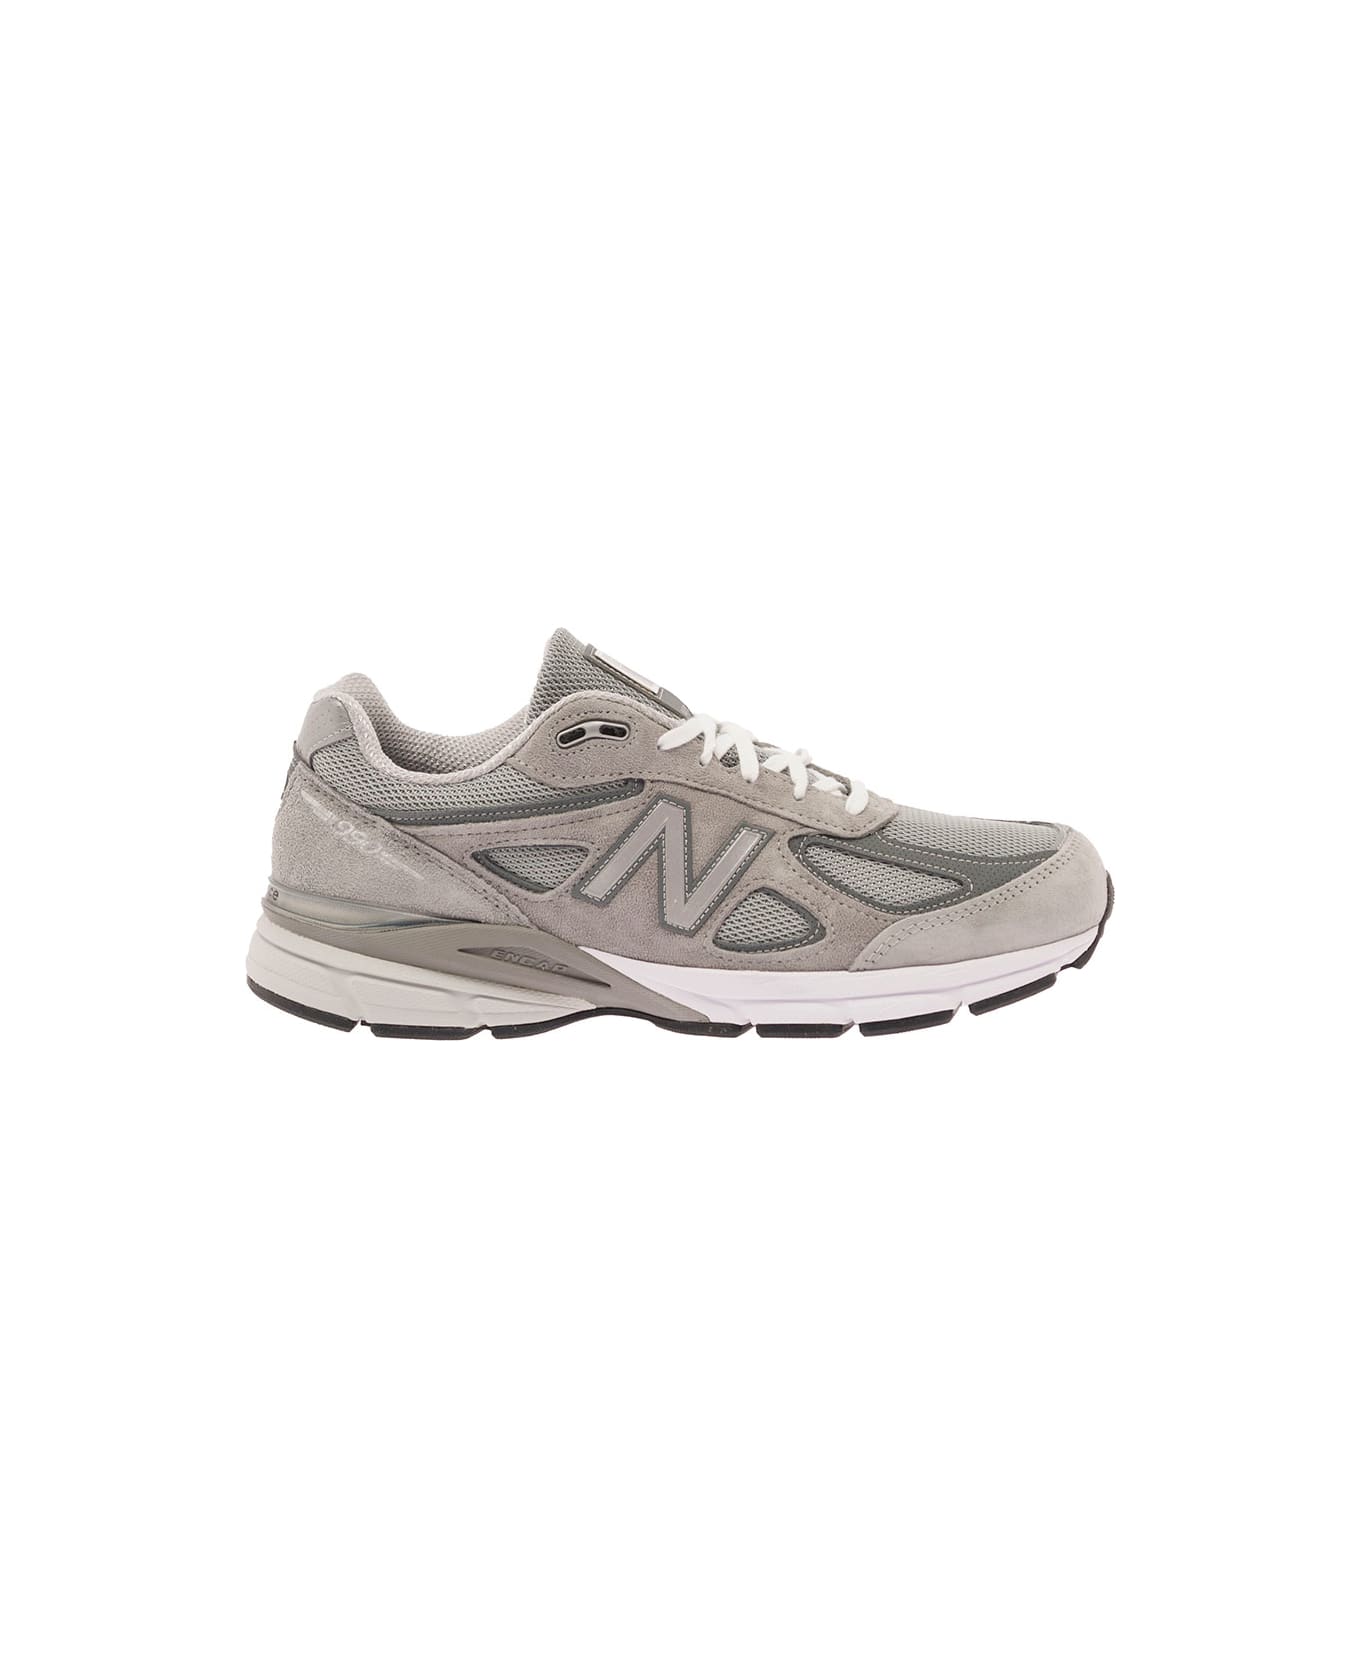 New Balance '990' Grey Low Top Sneakers With Logo Detail In Leather And Suede Woman - Grey